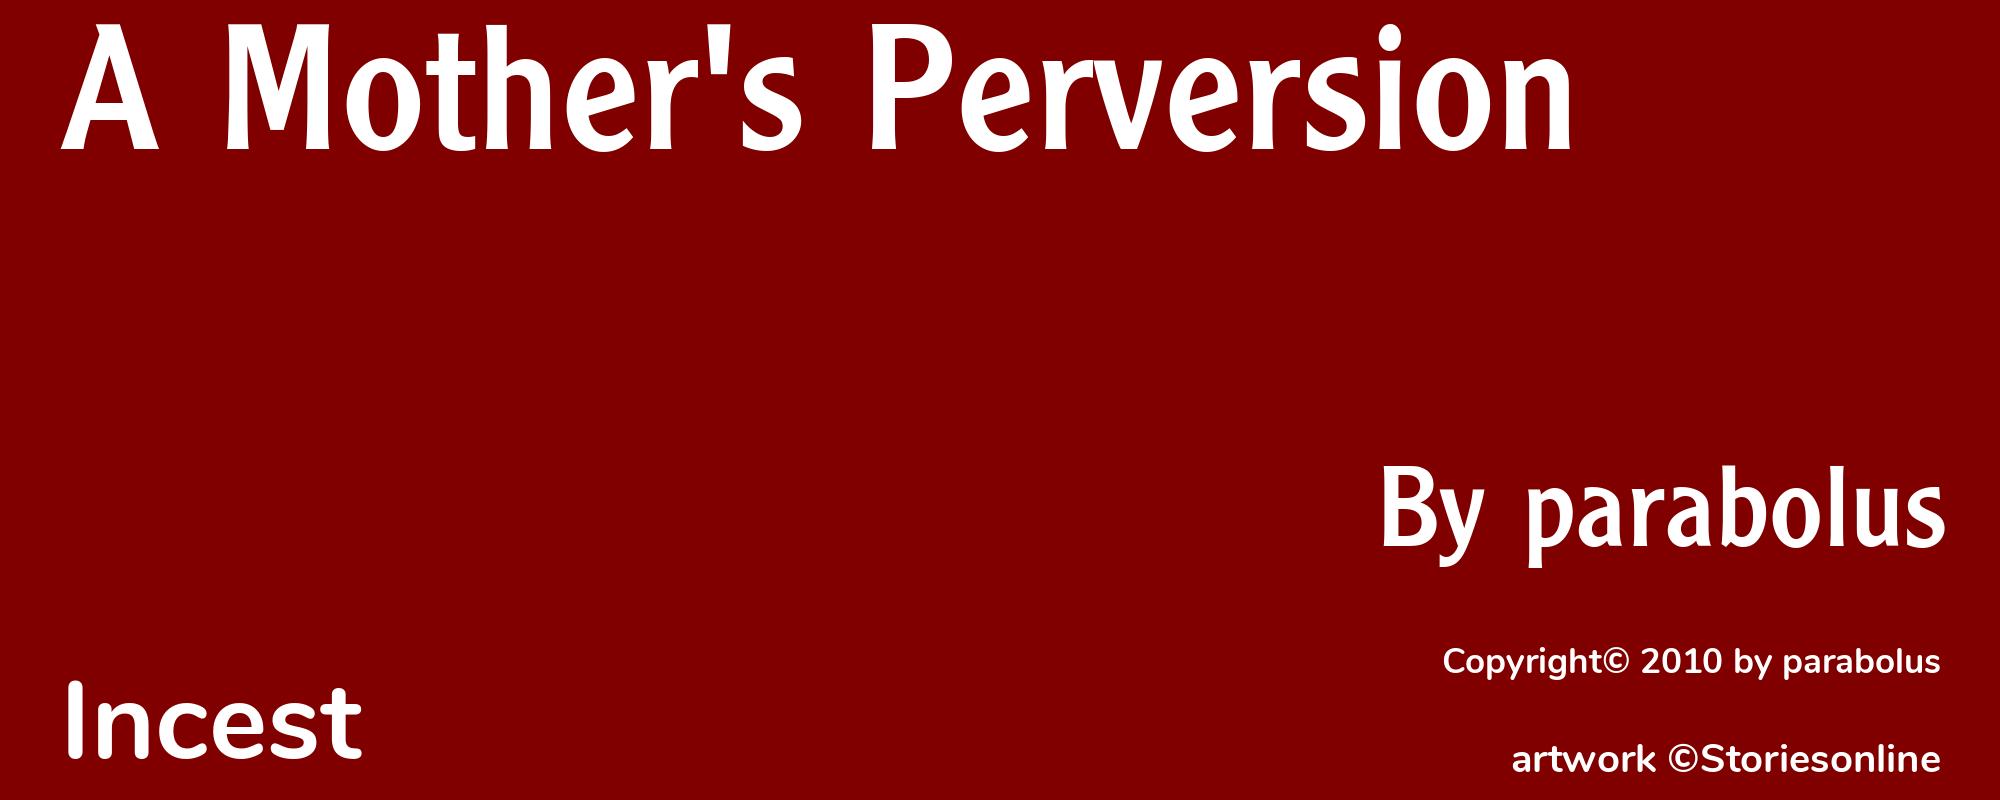 A Mother's Perversion - Cover